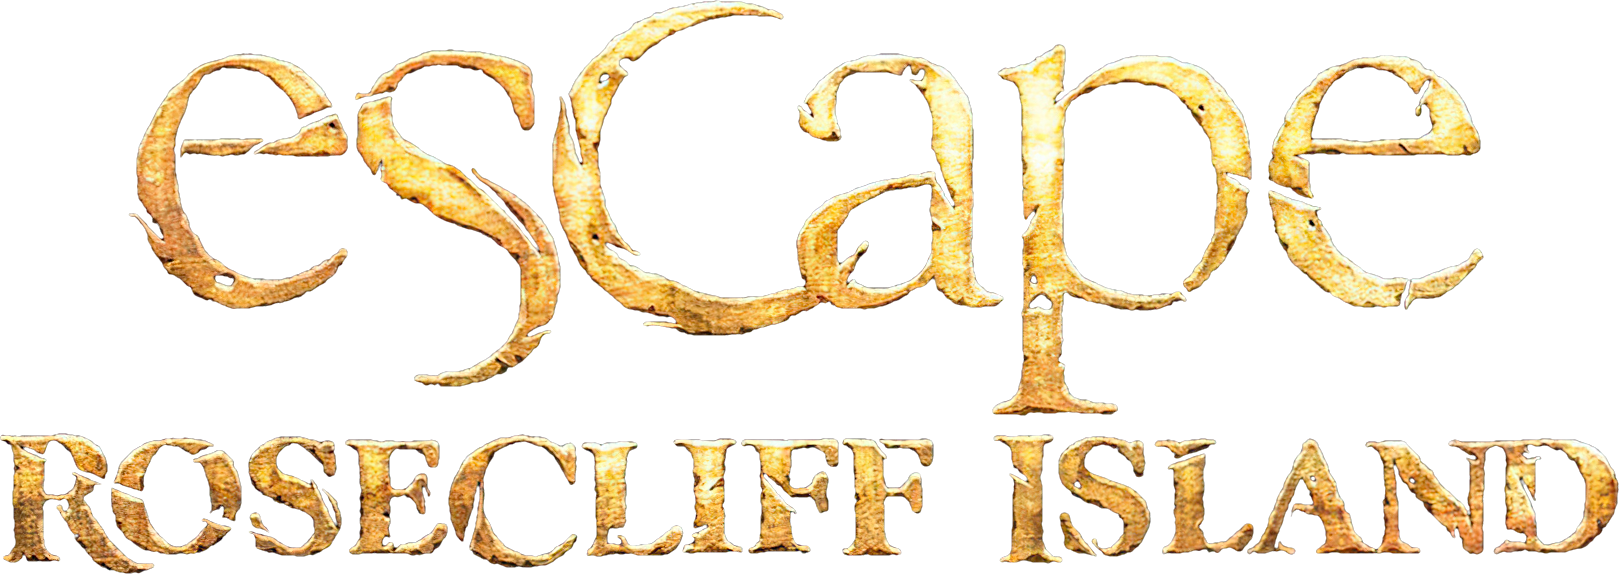 Escape Rosecliff Island on Steam